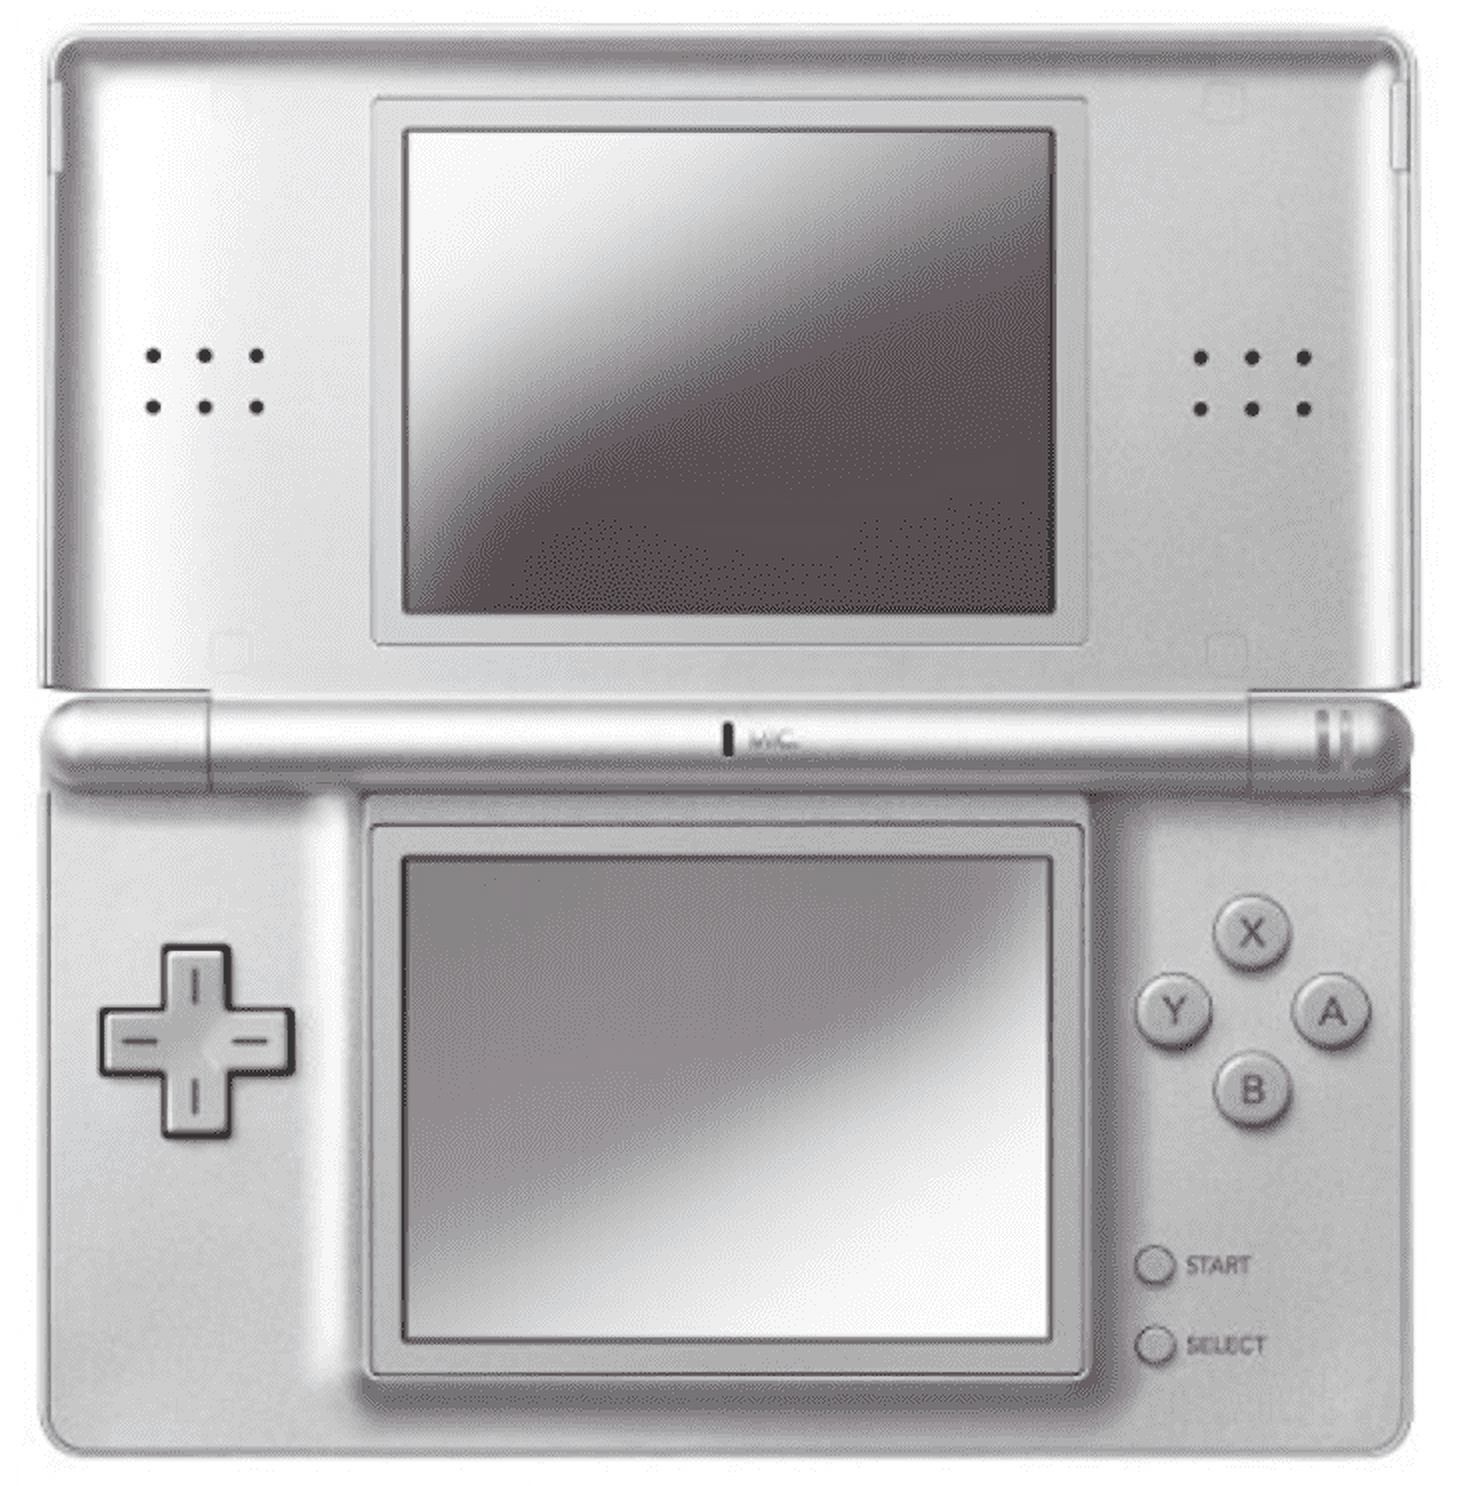 Authentic Nintendo DS Lite Metallic Silver Gray with Stylus and Charger - 100% OEM - image 3 of 3